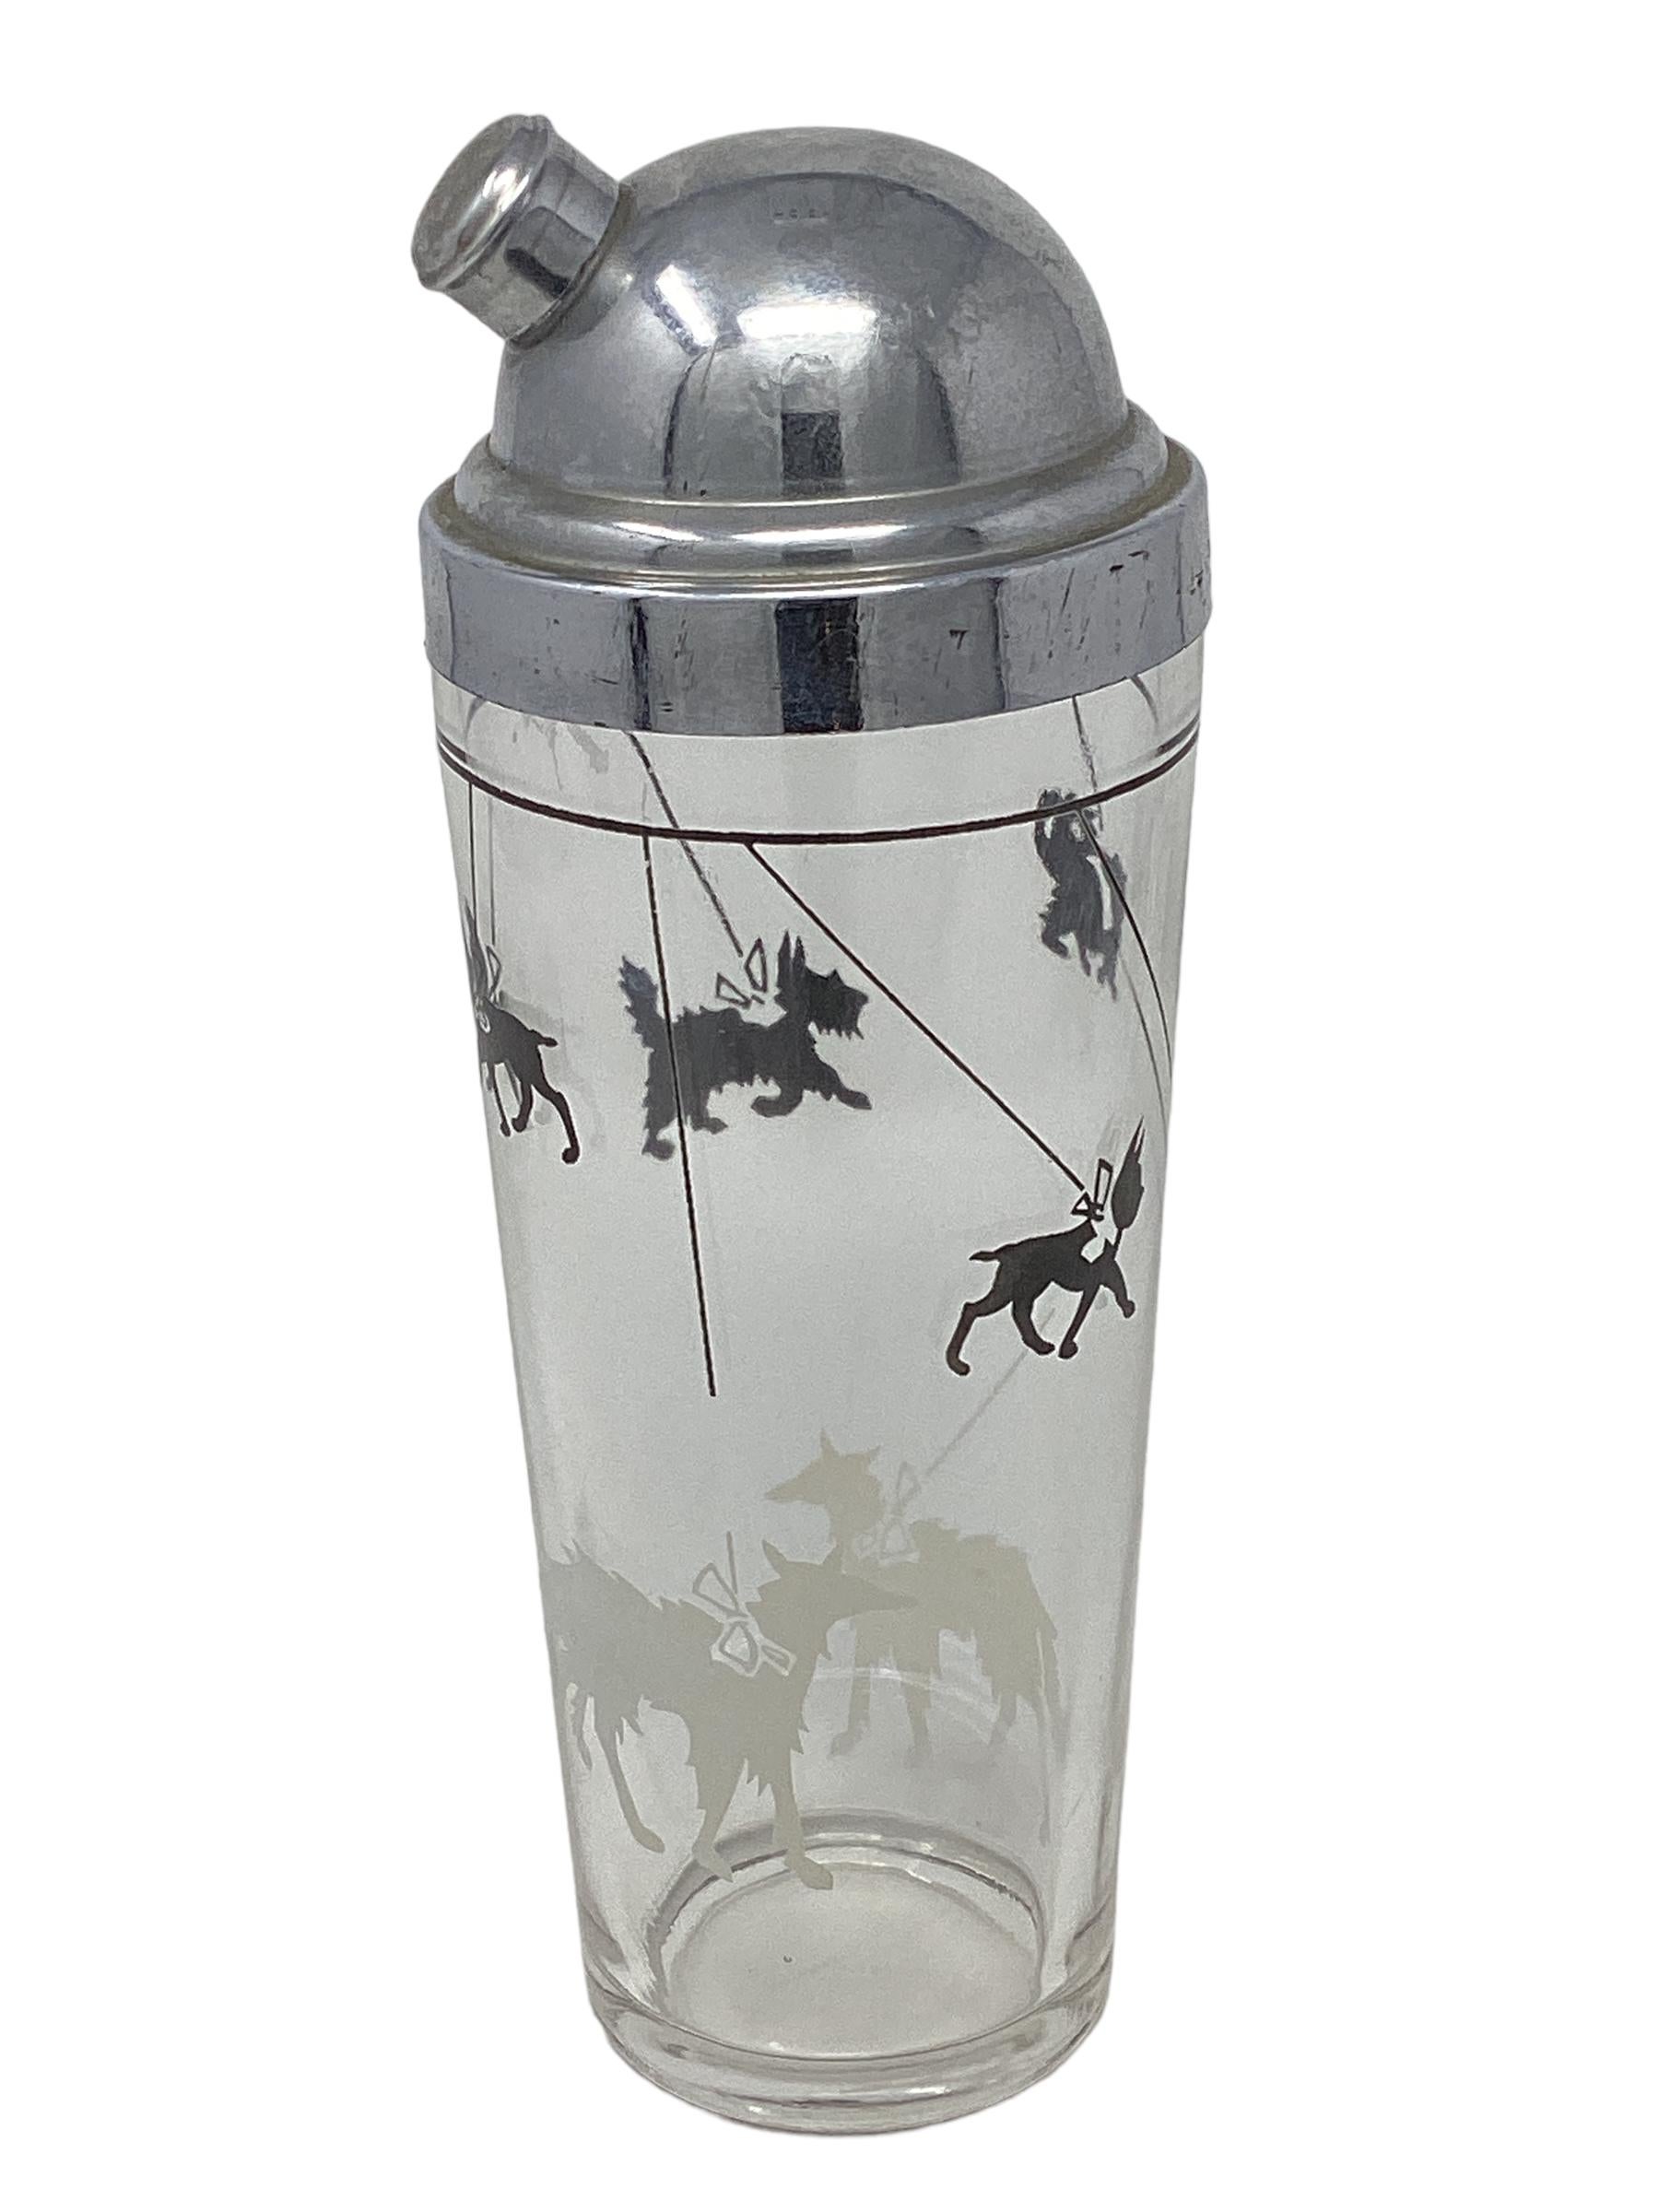 Mid-20th Century Art Deco Hazel-Atlas Cocktail Shaker with Leashed Dogs For Sale